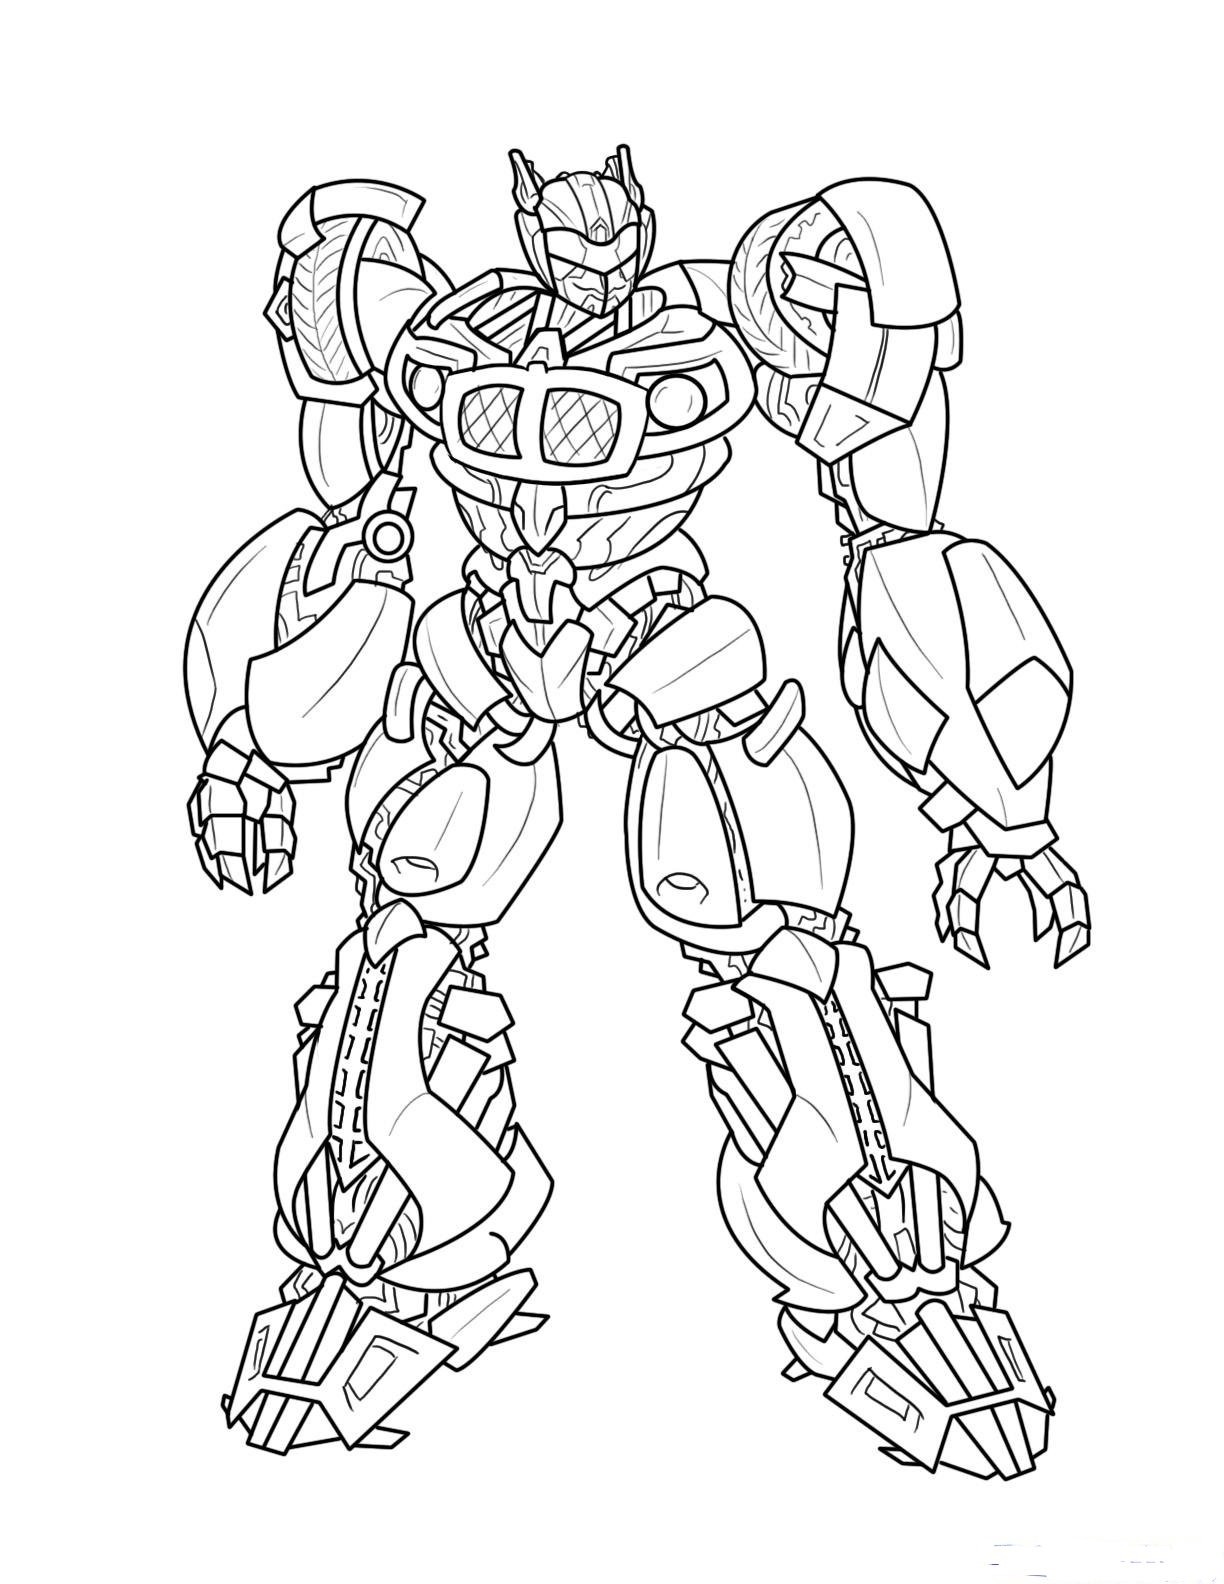 Rescue Bots Coloring Pages Free at Free printable